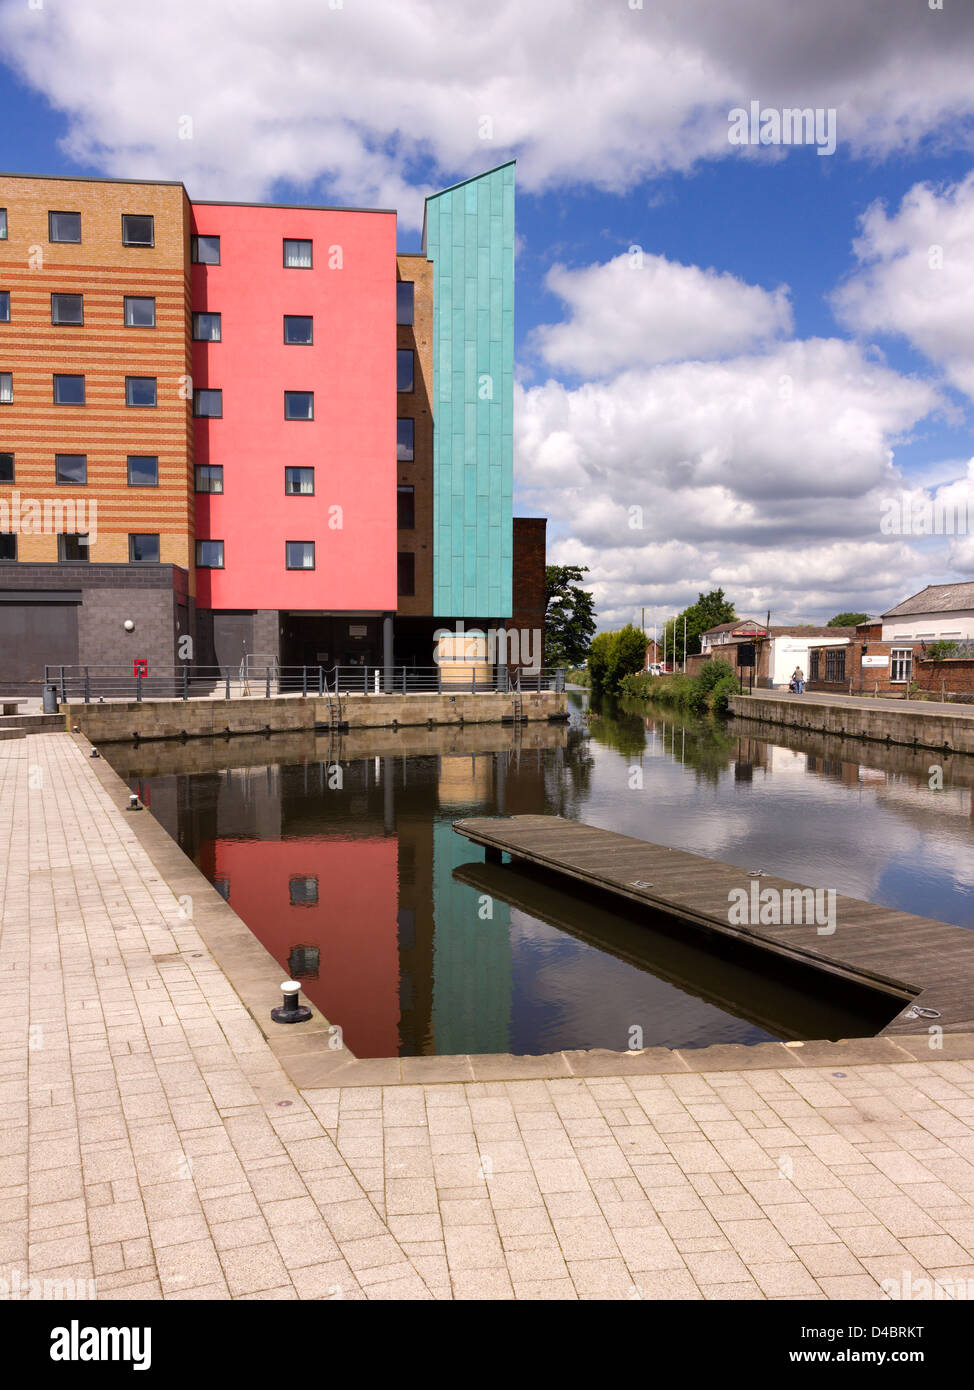 New modern flats and apartments by Loughborough canal basin, Loughborough, Leicestershire, England, UK Stock Photo